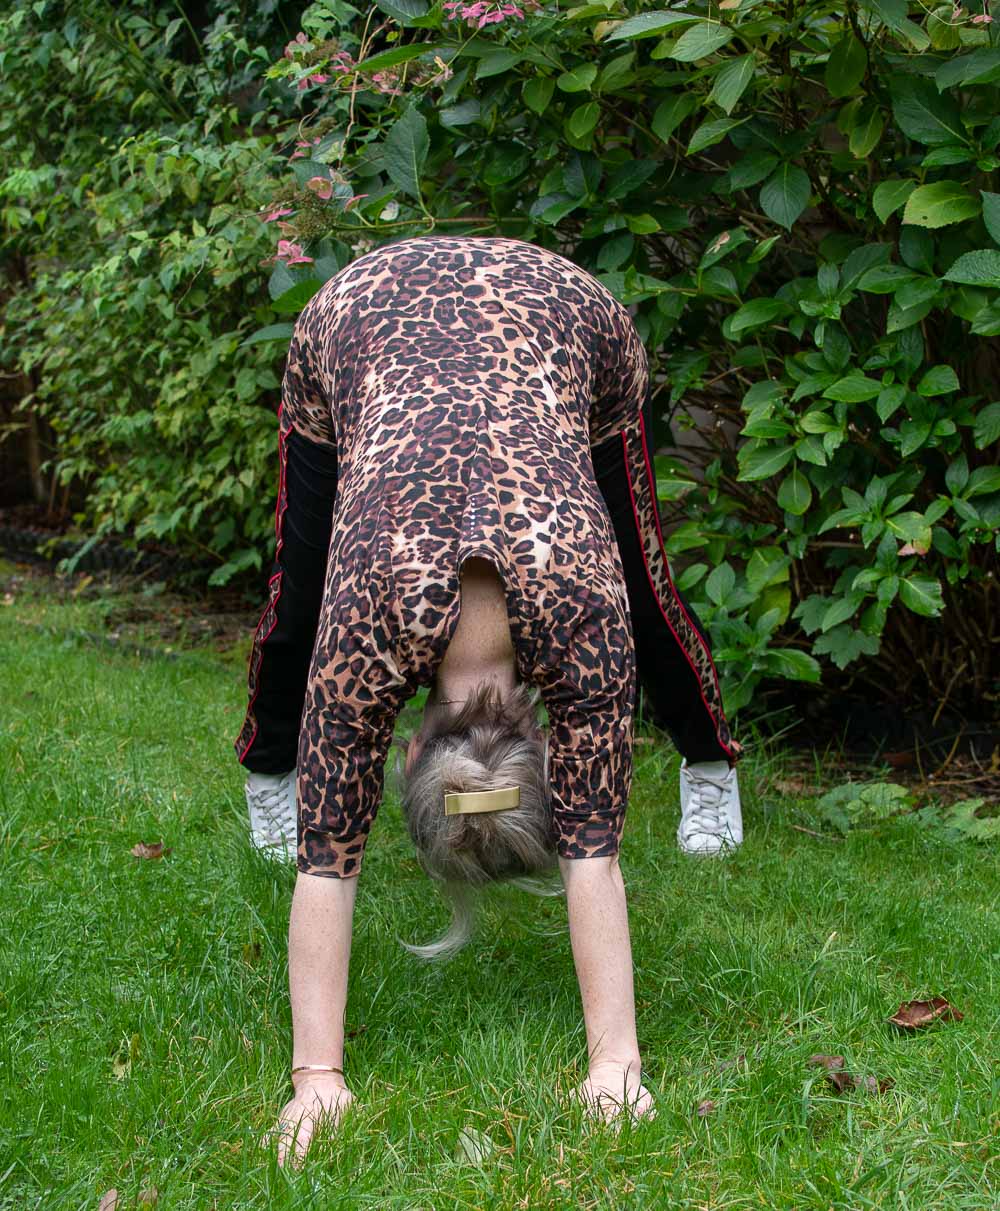 Karen Maurice of n4mummy doing a downward dog, wearing Asquith's eco-friendly activewear made from bamboo.